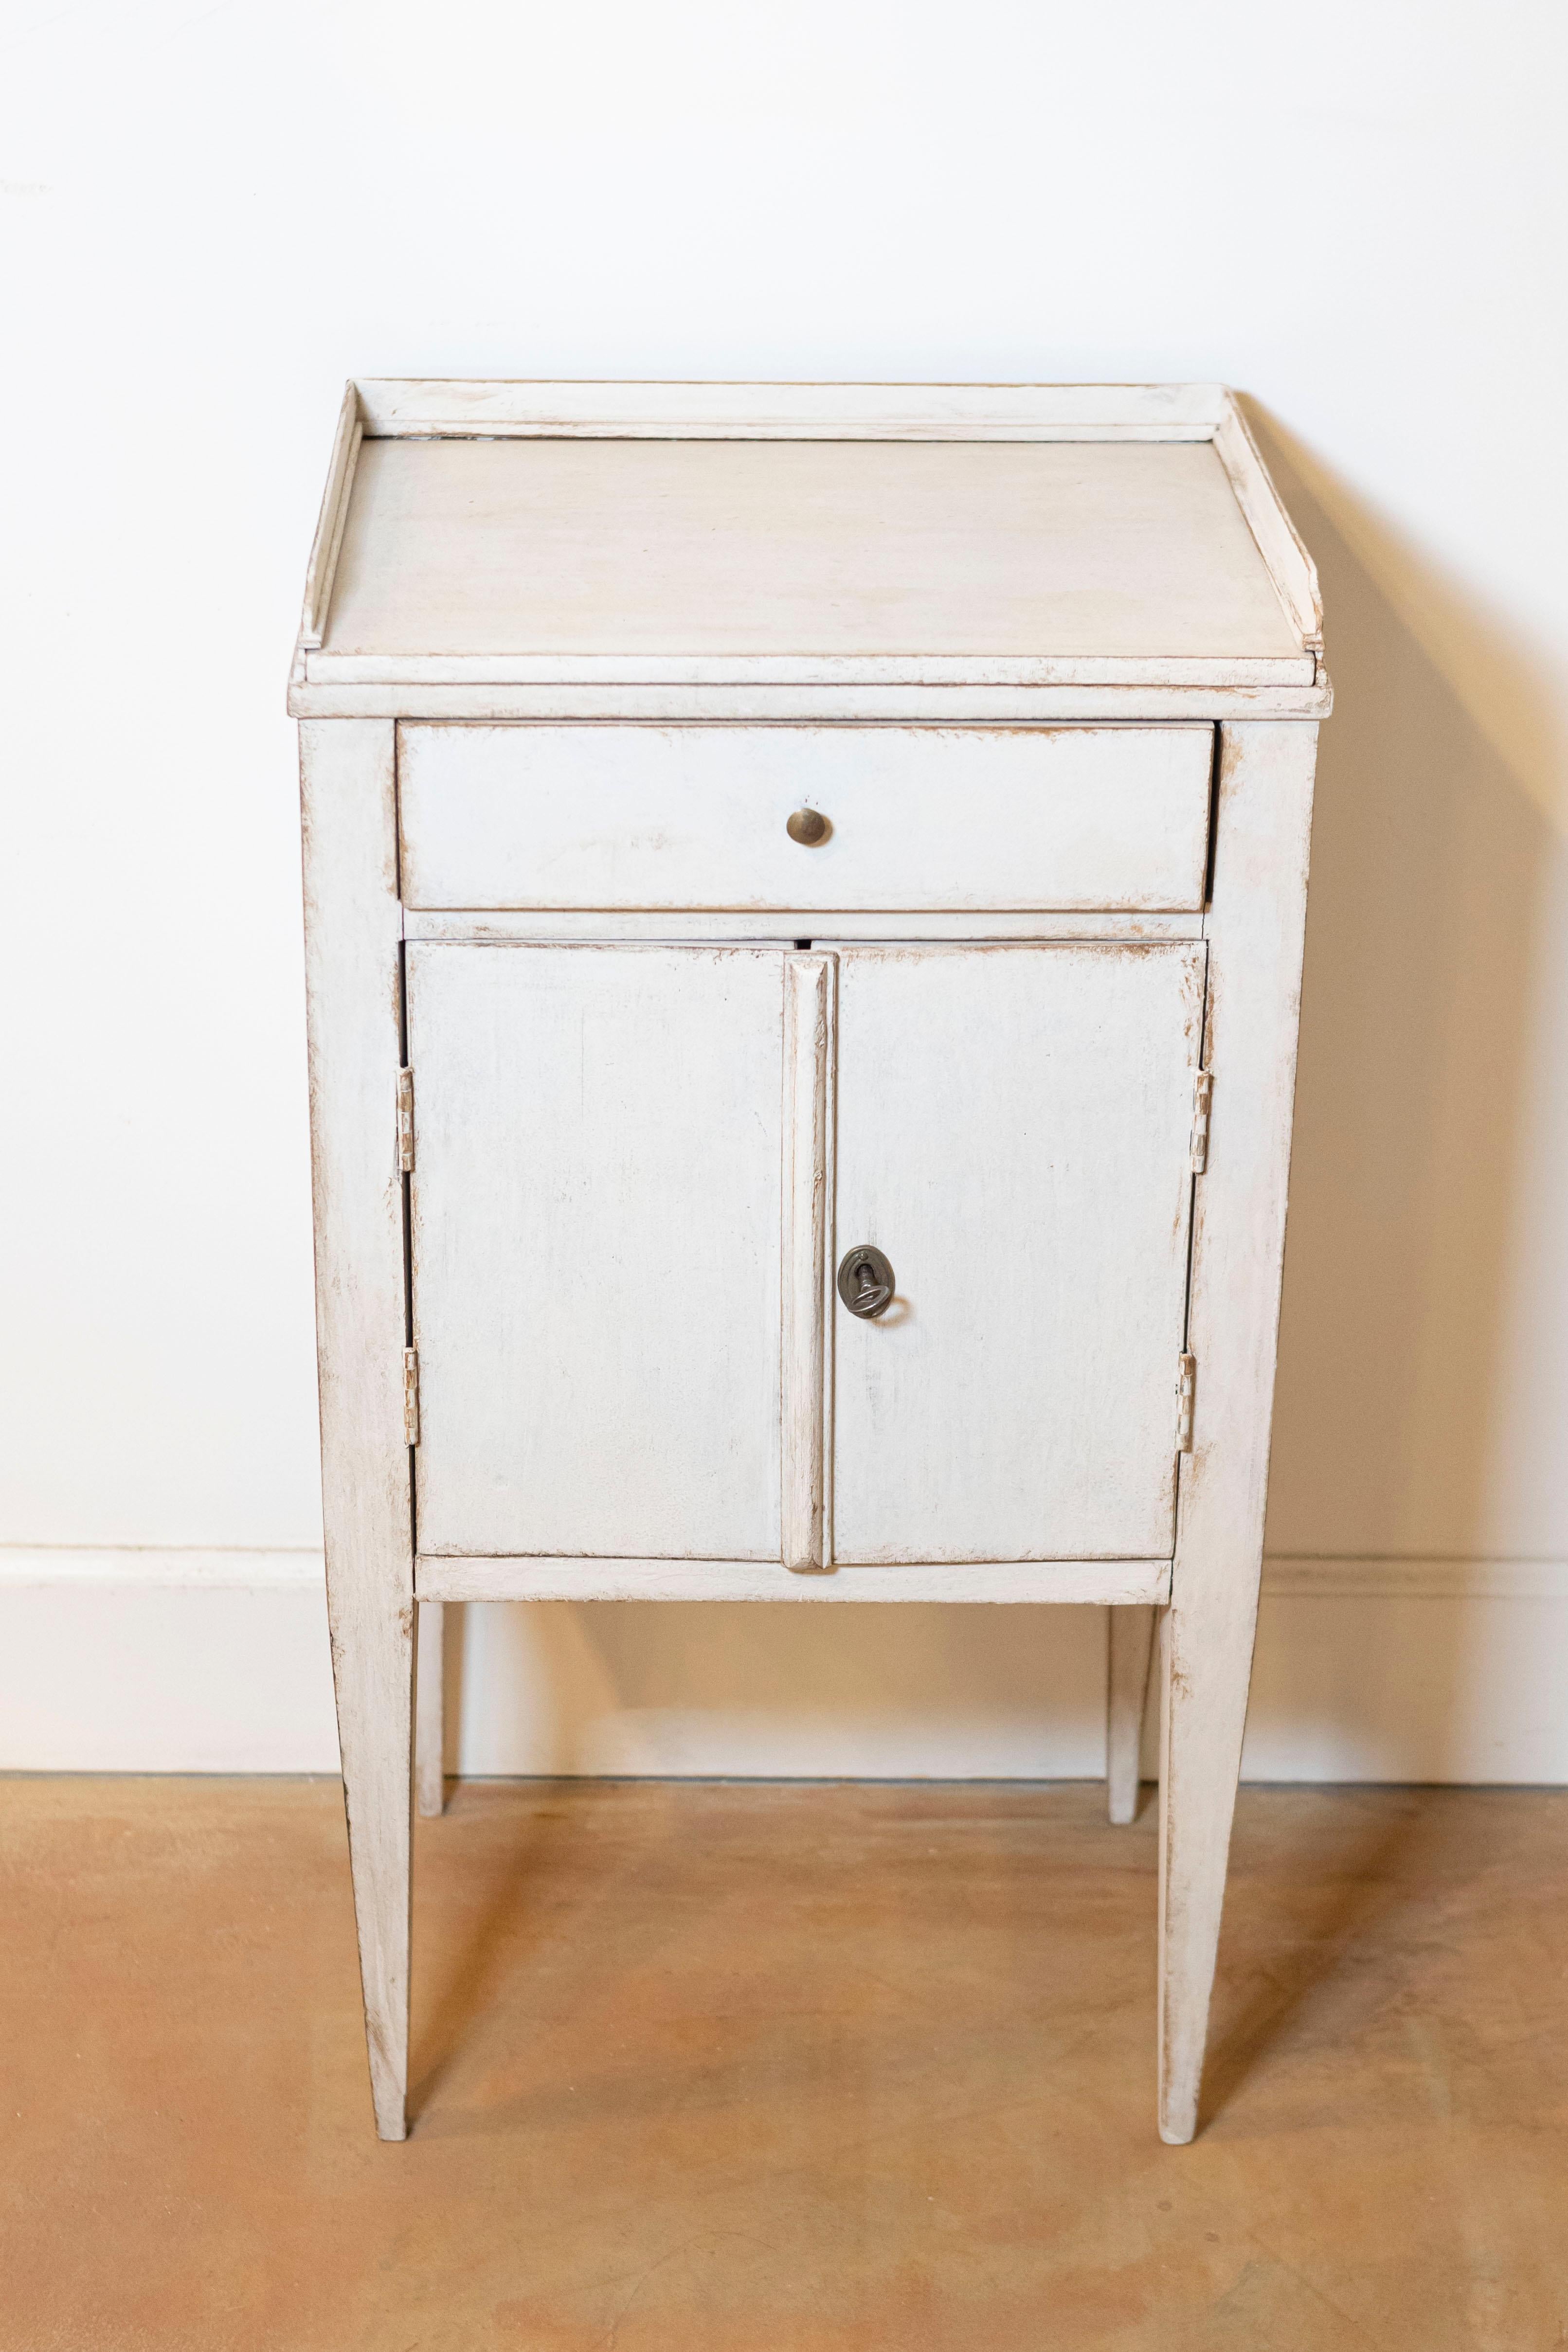 A Swedish bedside table from the 19th century with gray/cream painted finish, three-quarter gallery encircling the top, single drawer, petite double doors and tapered legs. This 19th-century Swedish bedside table is a charming piece that beautifully